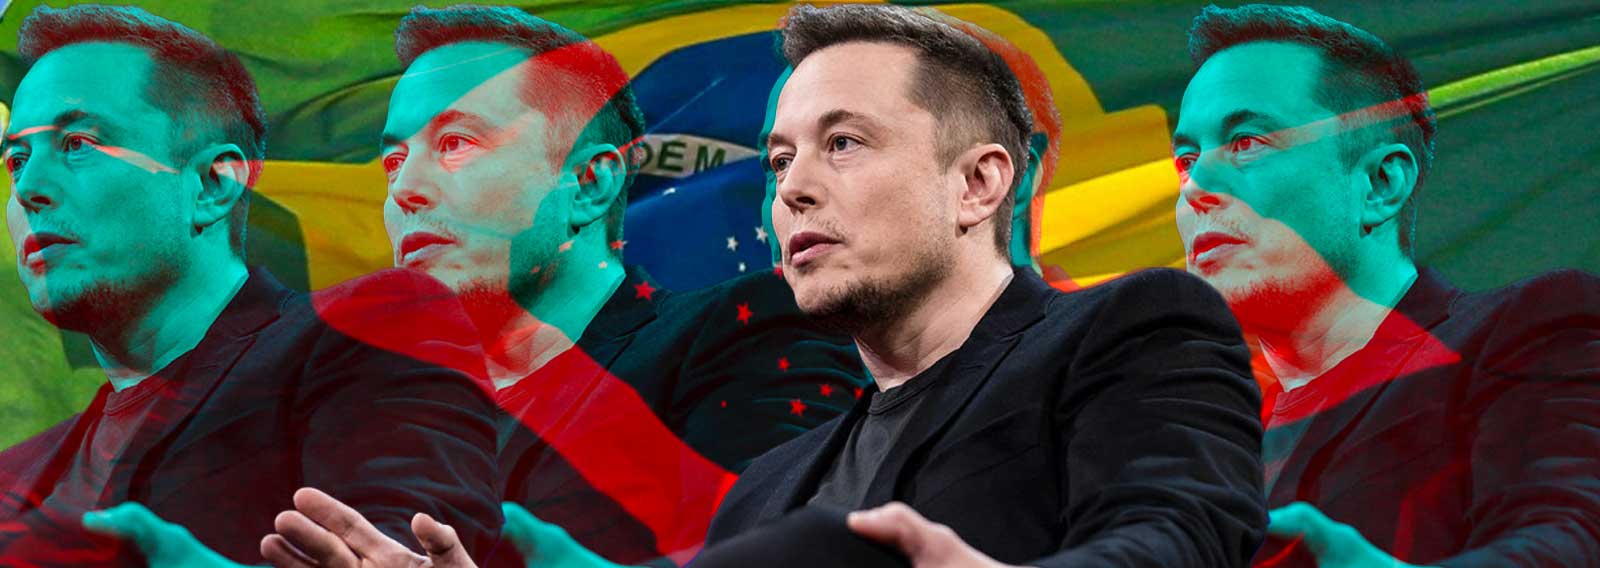 Could Musk Be the Next Assange? Brazilian Government’s War On X